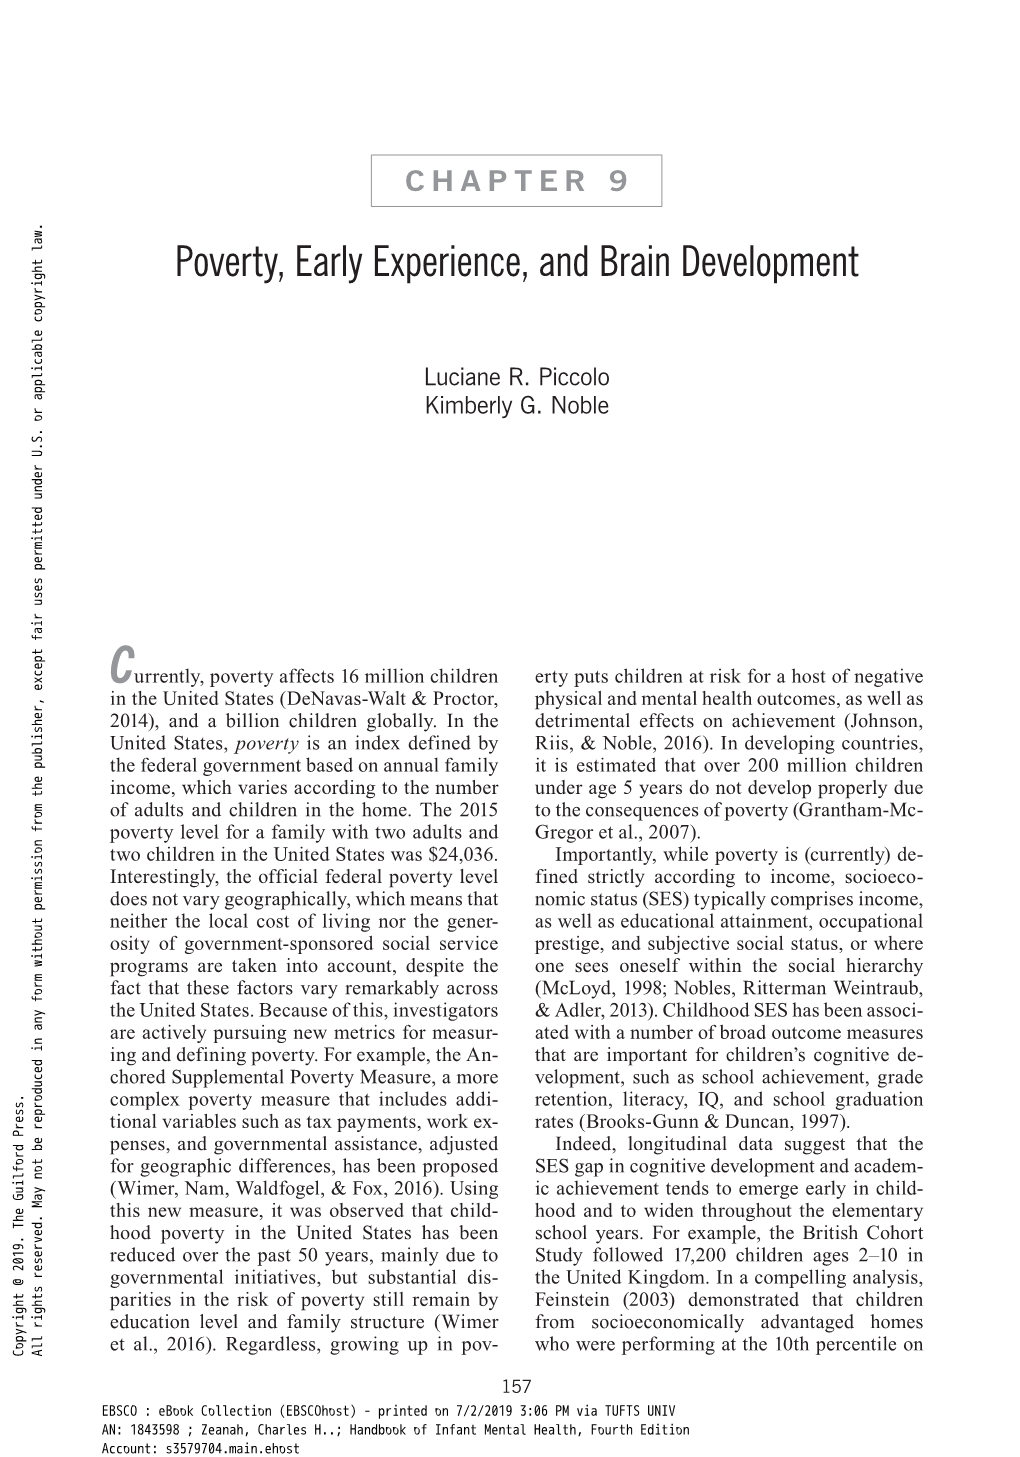 Chapter 9: Poverty, Early Experience, and Brain Development